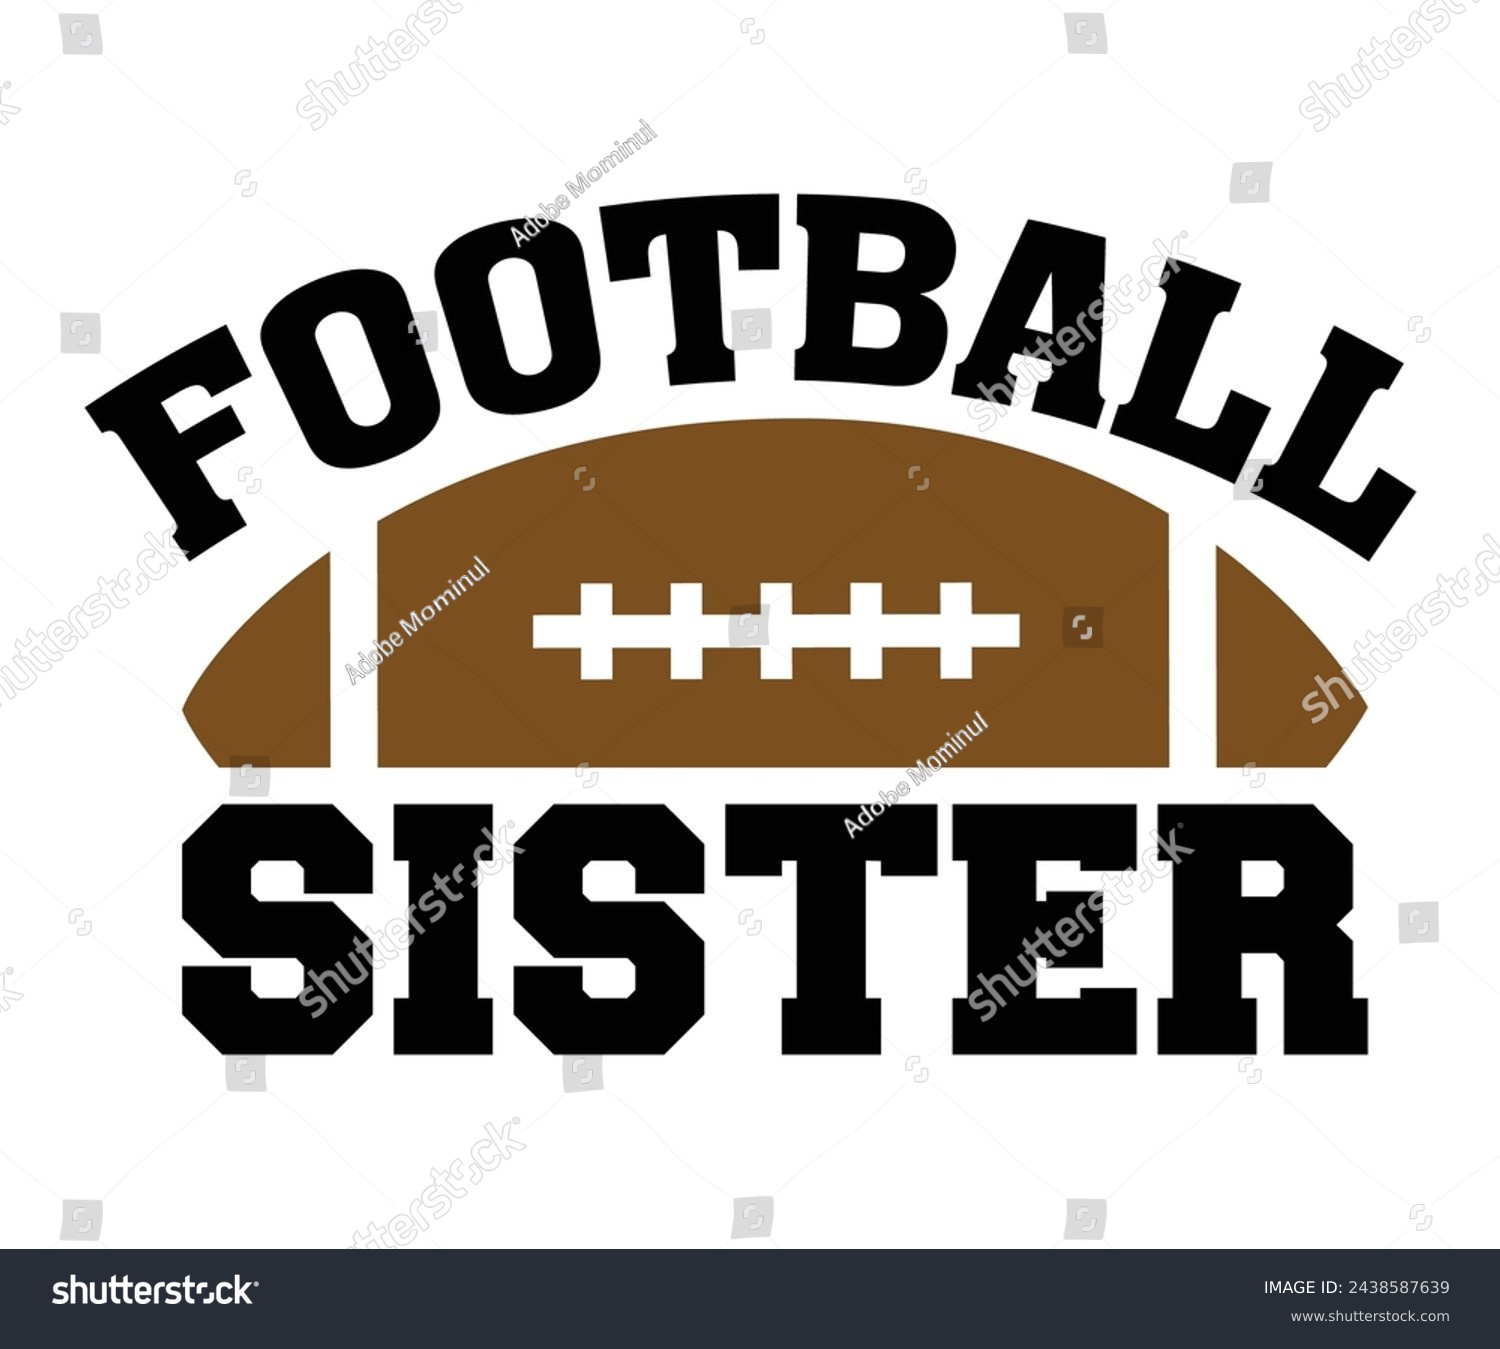 SVG of Football Sister Svg,Football Svg,Football Player Svg,Game Day Shirt,Football Quotes Svg,American Football Svg,Soccer Svg,Cut File,Commercial use svg